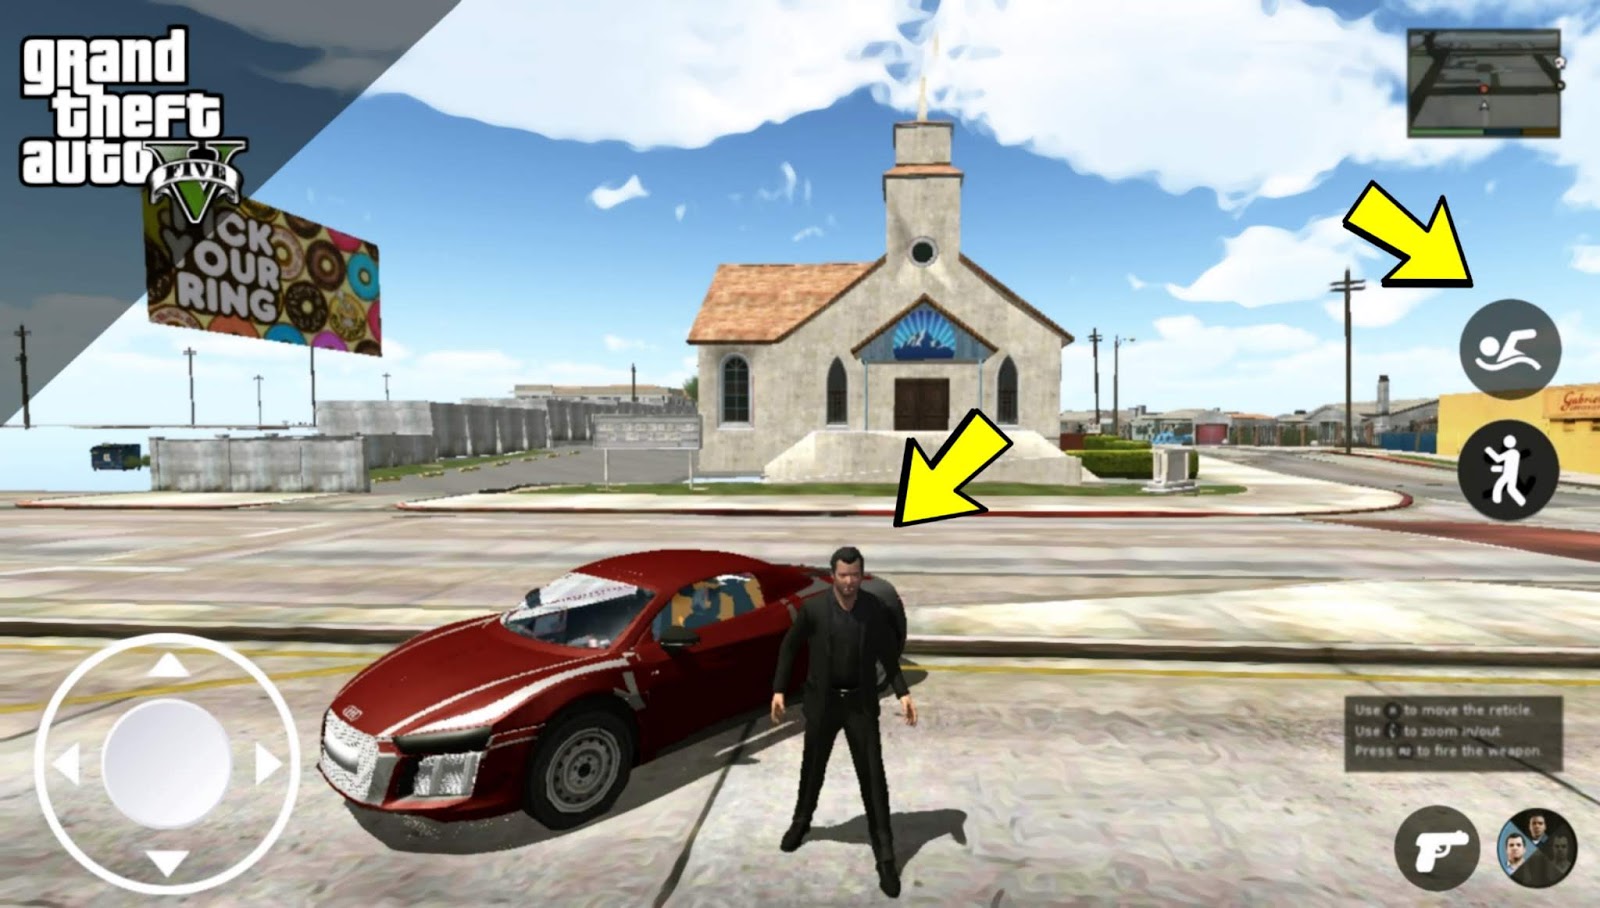 Gta 5 mobile android skachat фото 90